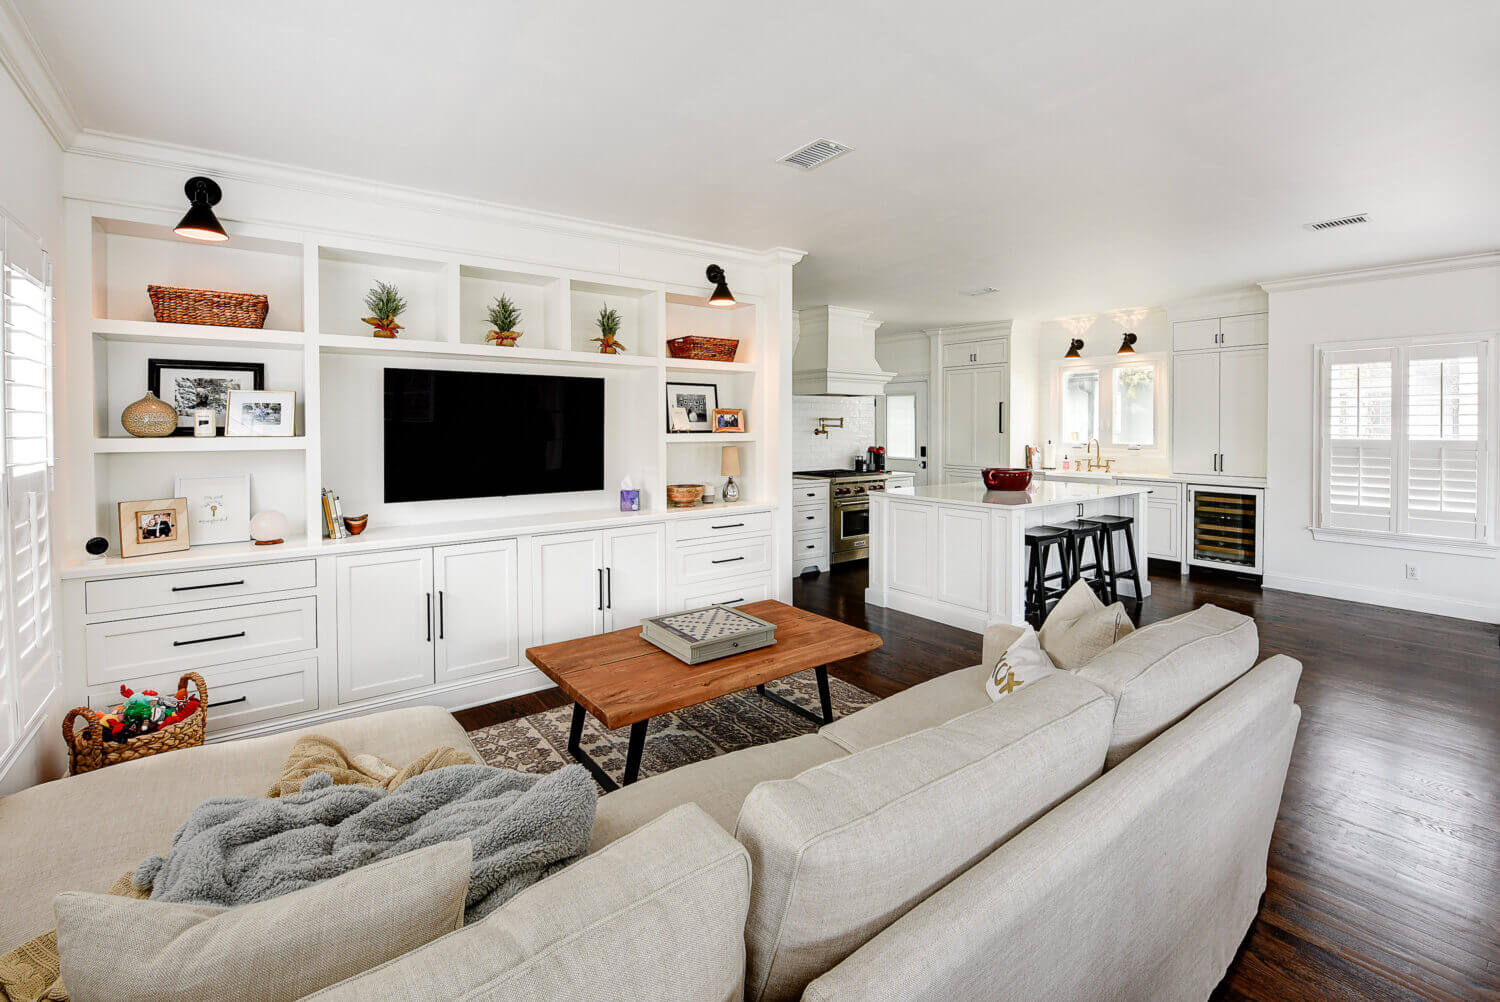 An all white open concept living room and kitchen. The built-in entertainment center matches the bright white shaker kitchen cabinetry.